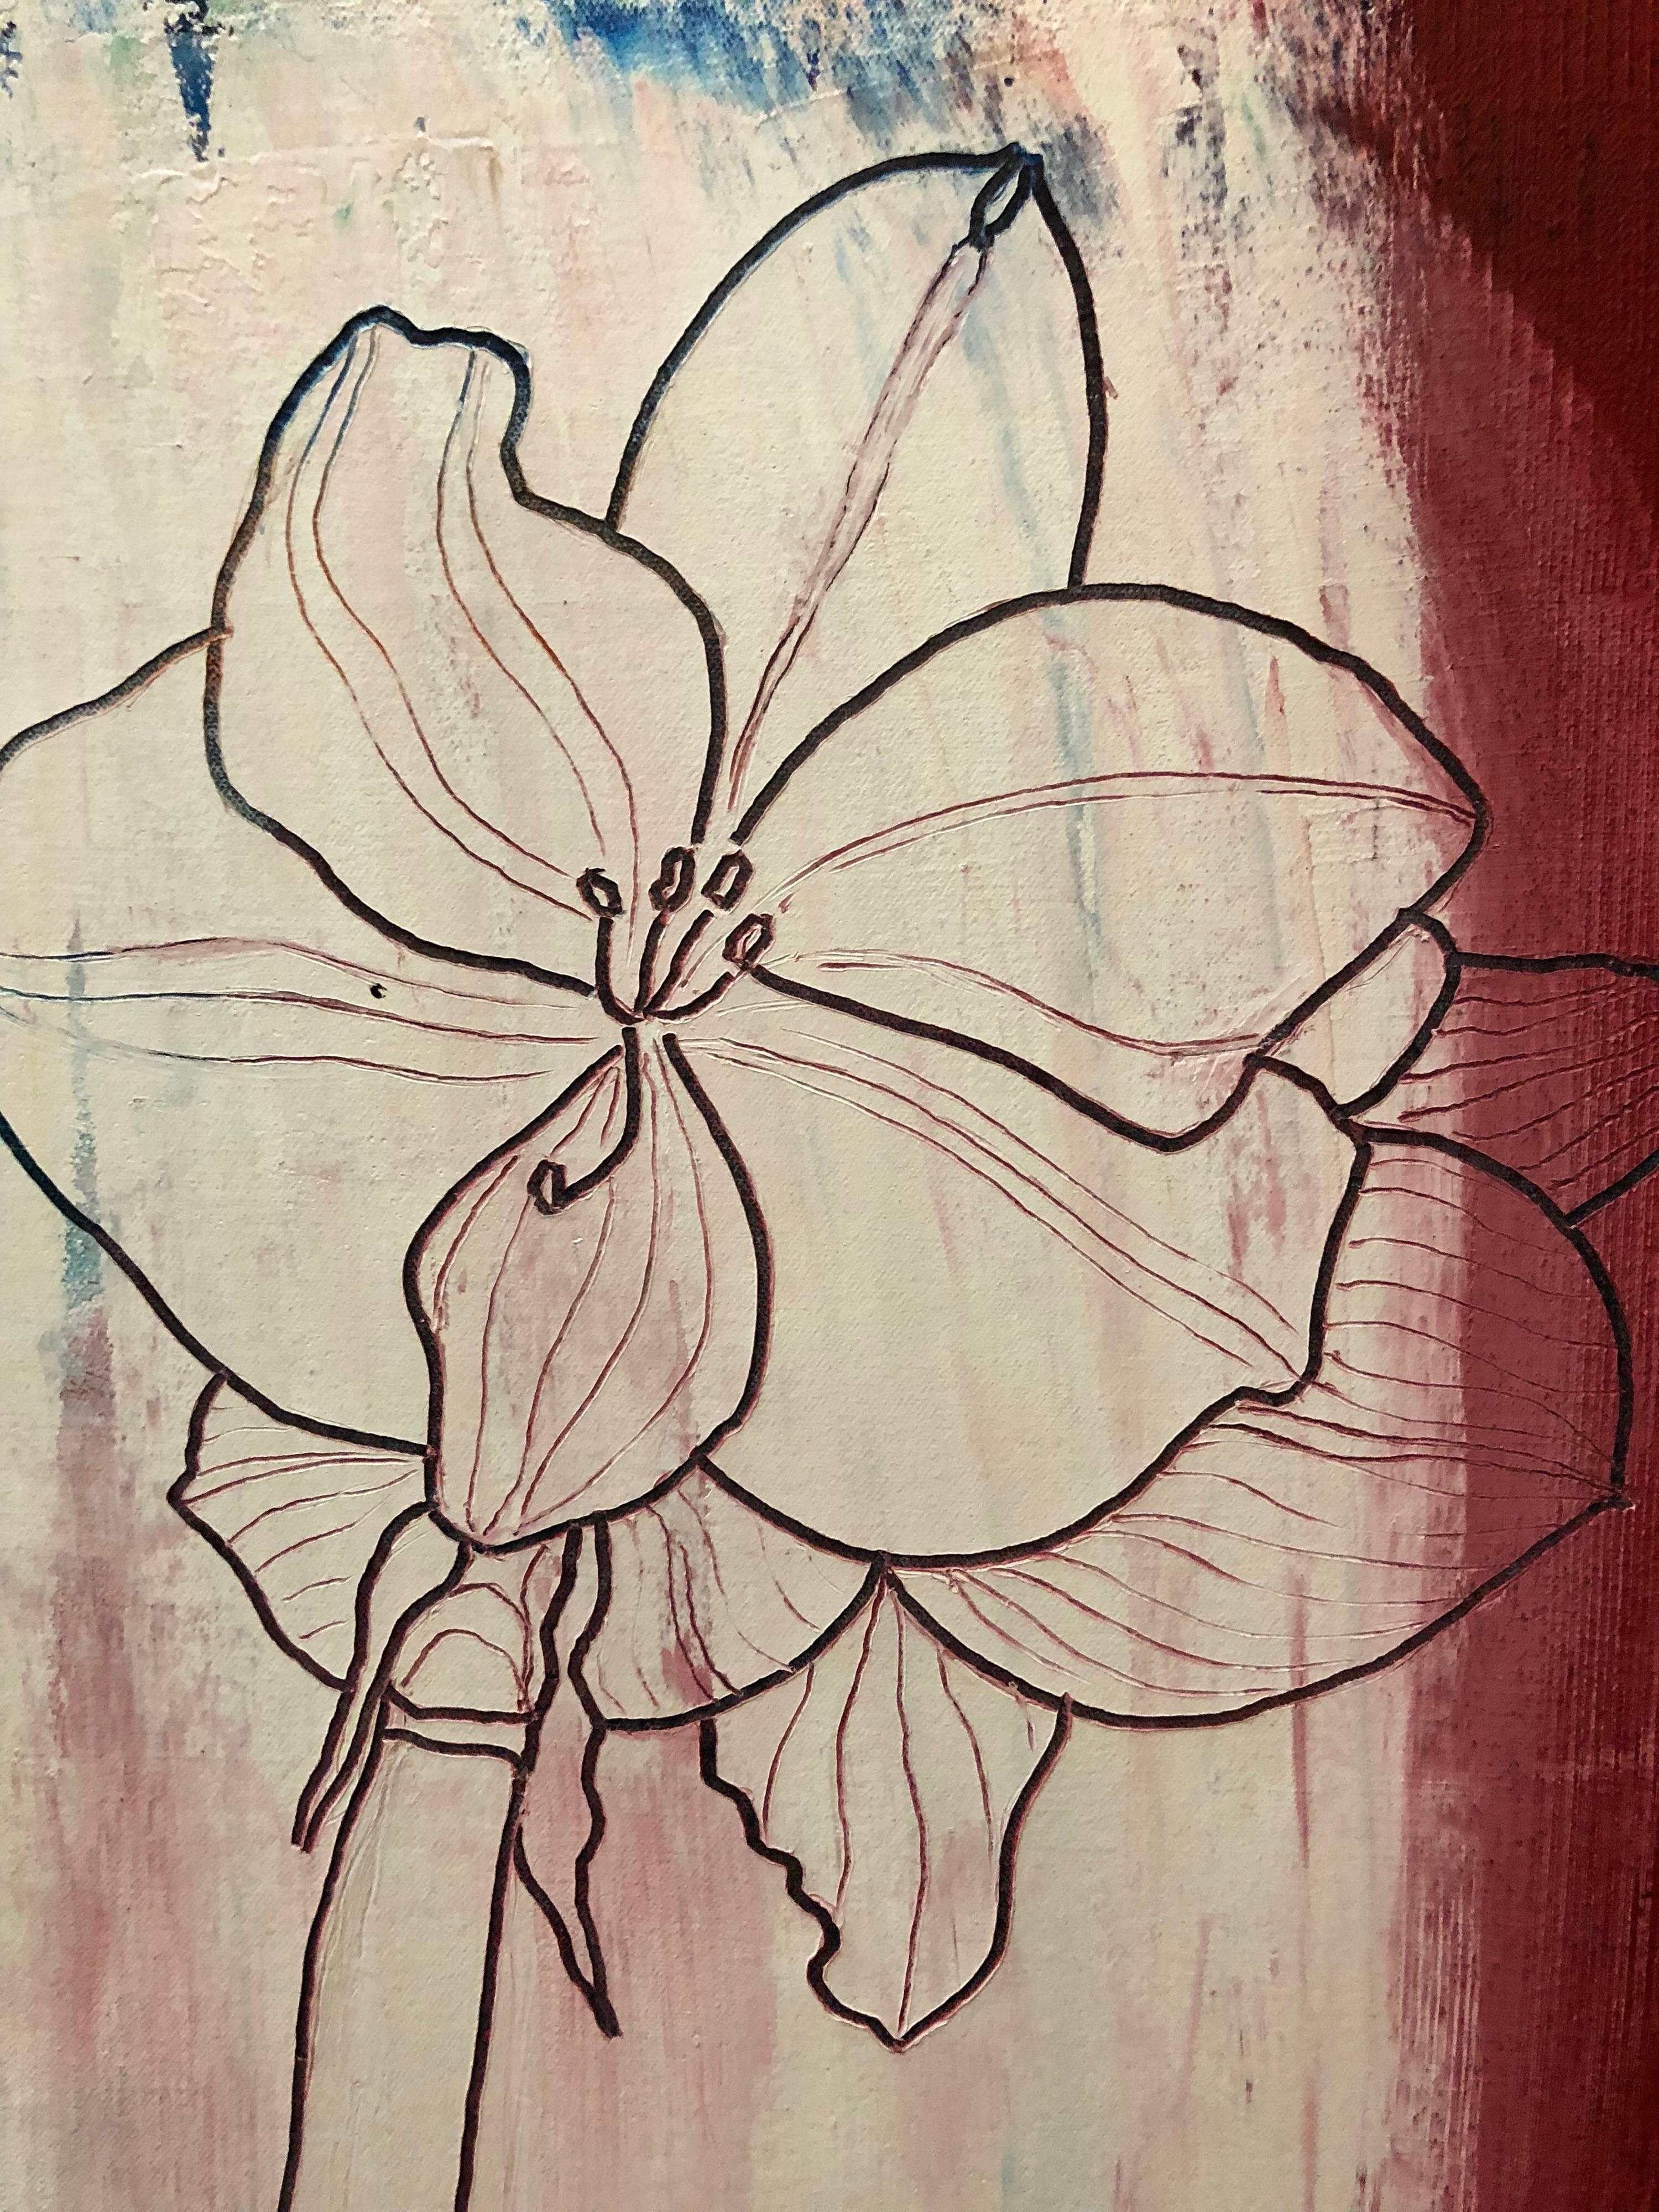 This piece is done in a sort of sgraffito technique with the flowers sort of etched in the paint. 
Born in Tokyo, Japan, Nobu Fukui Came to New York where he became a US citizen. From 1964 - 65, he studied at the Art Students League in New York